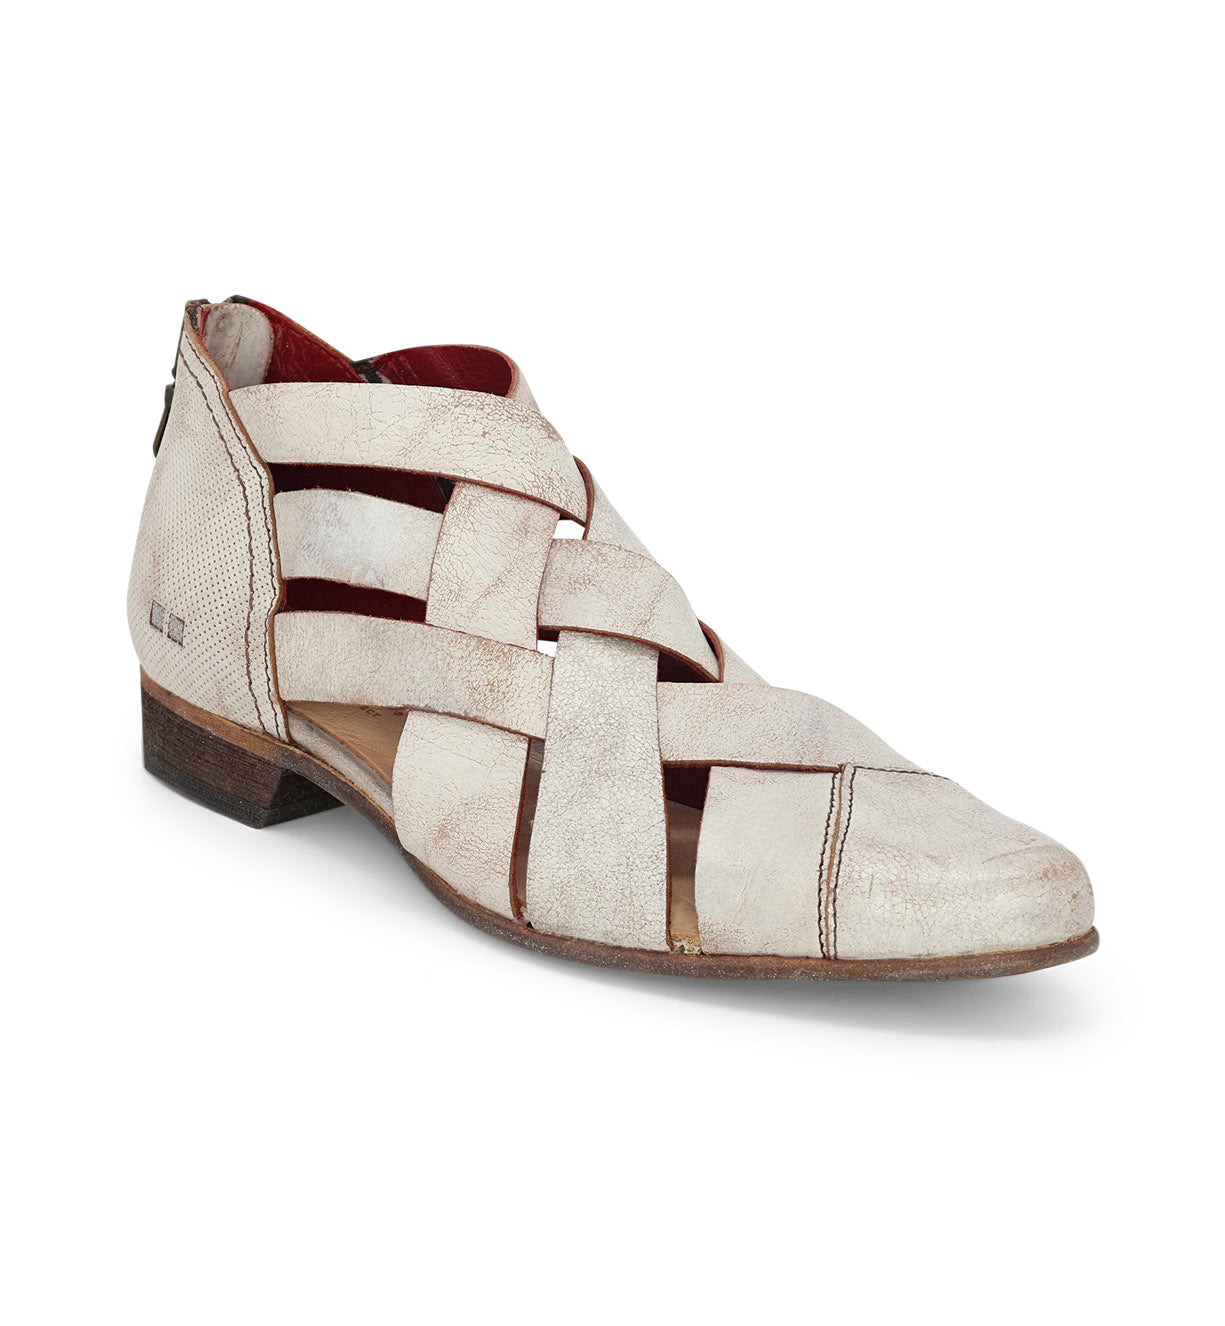 A white women's shoe with a woven strap, called Brittany by Bed Stu.